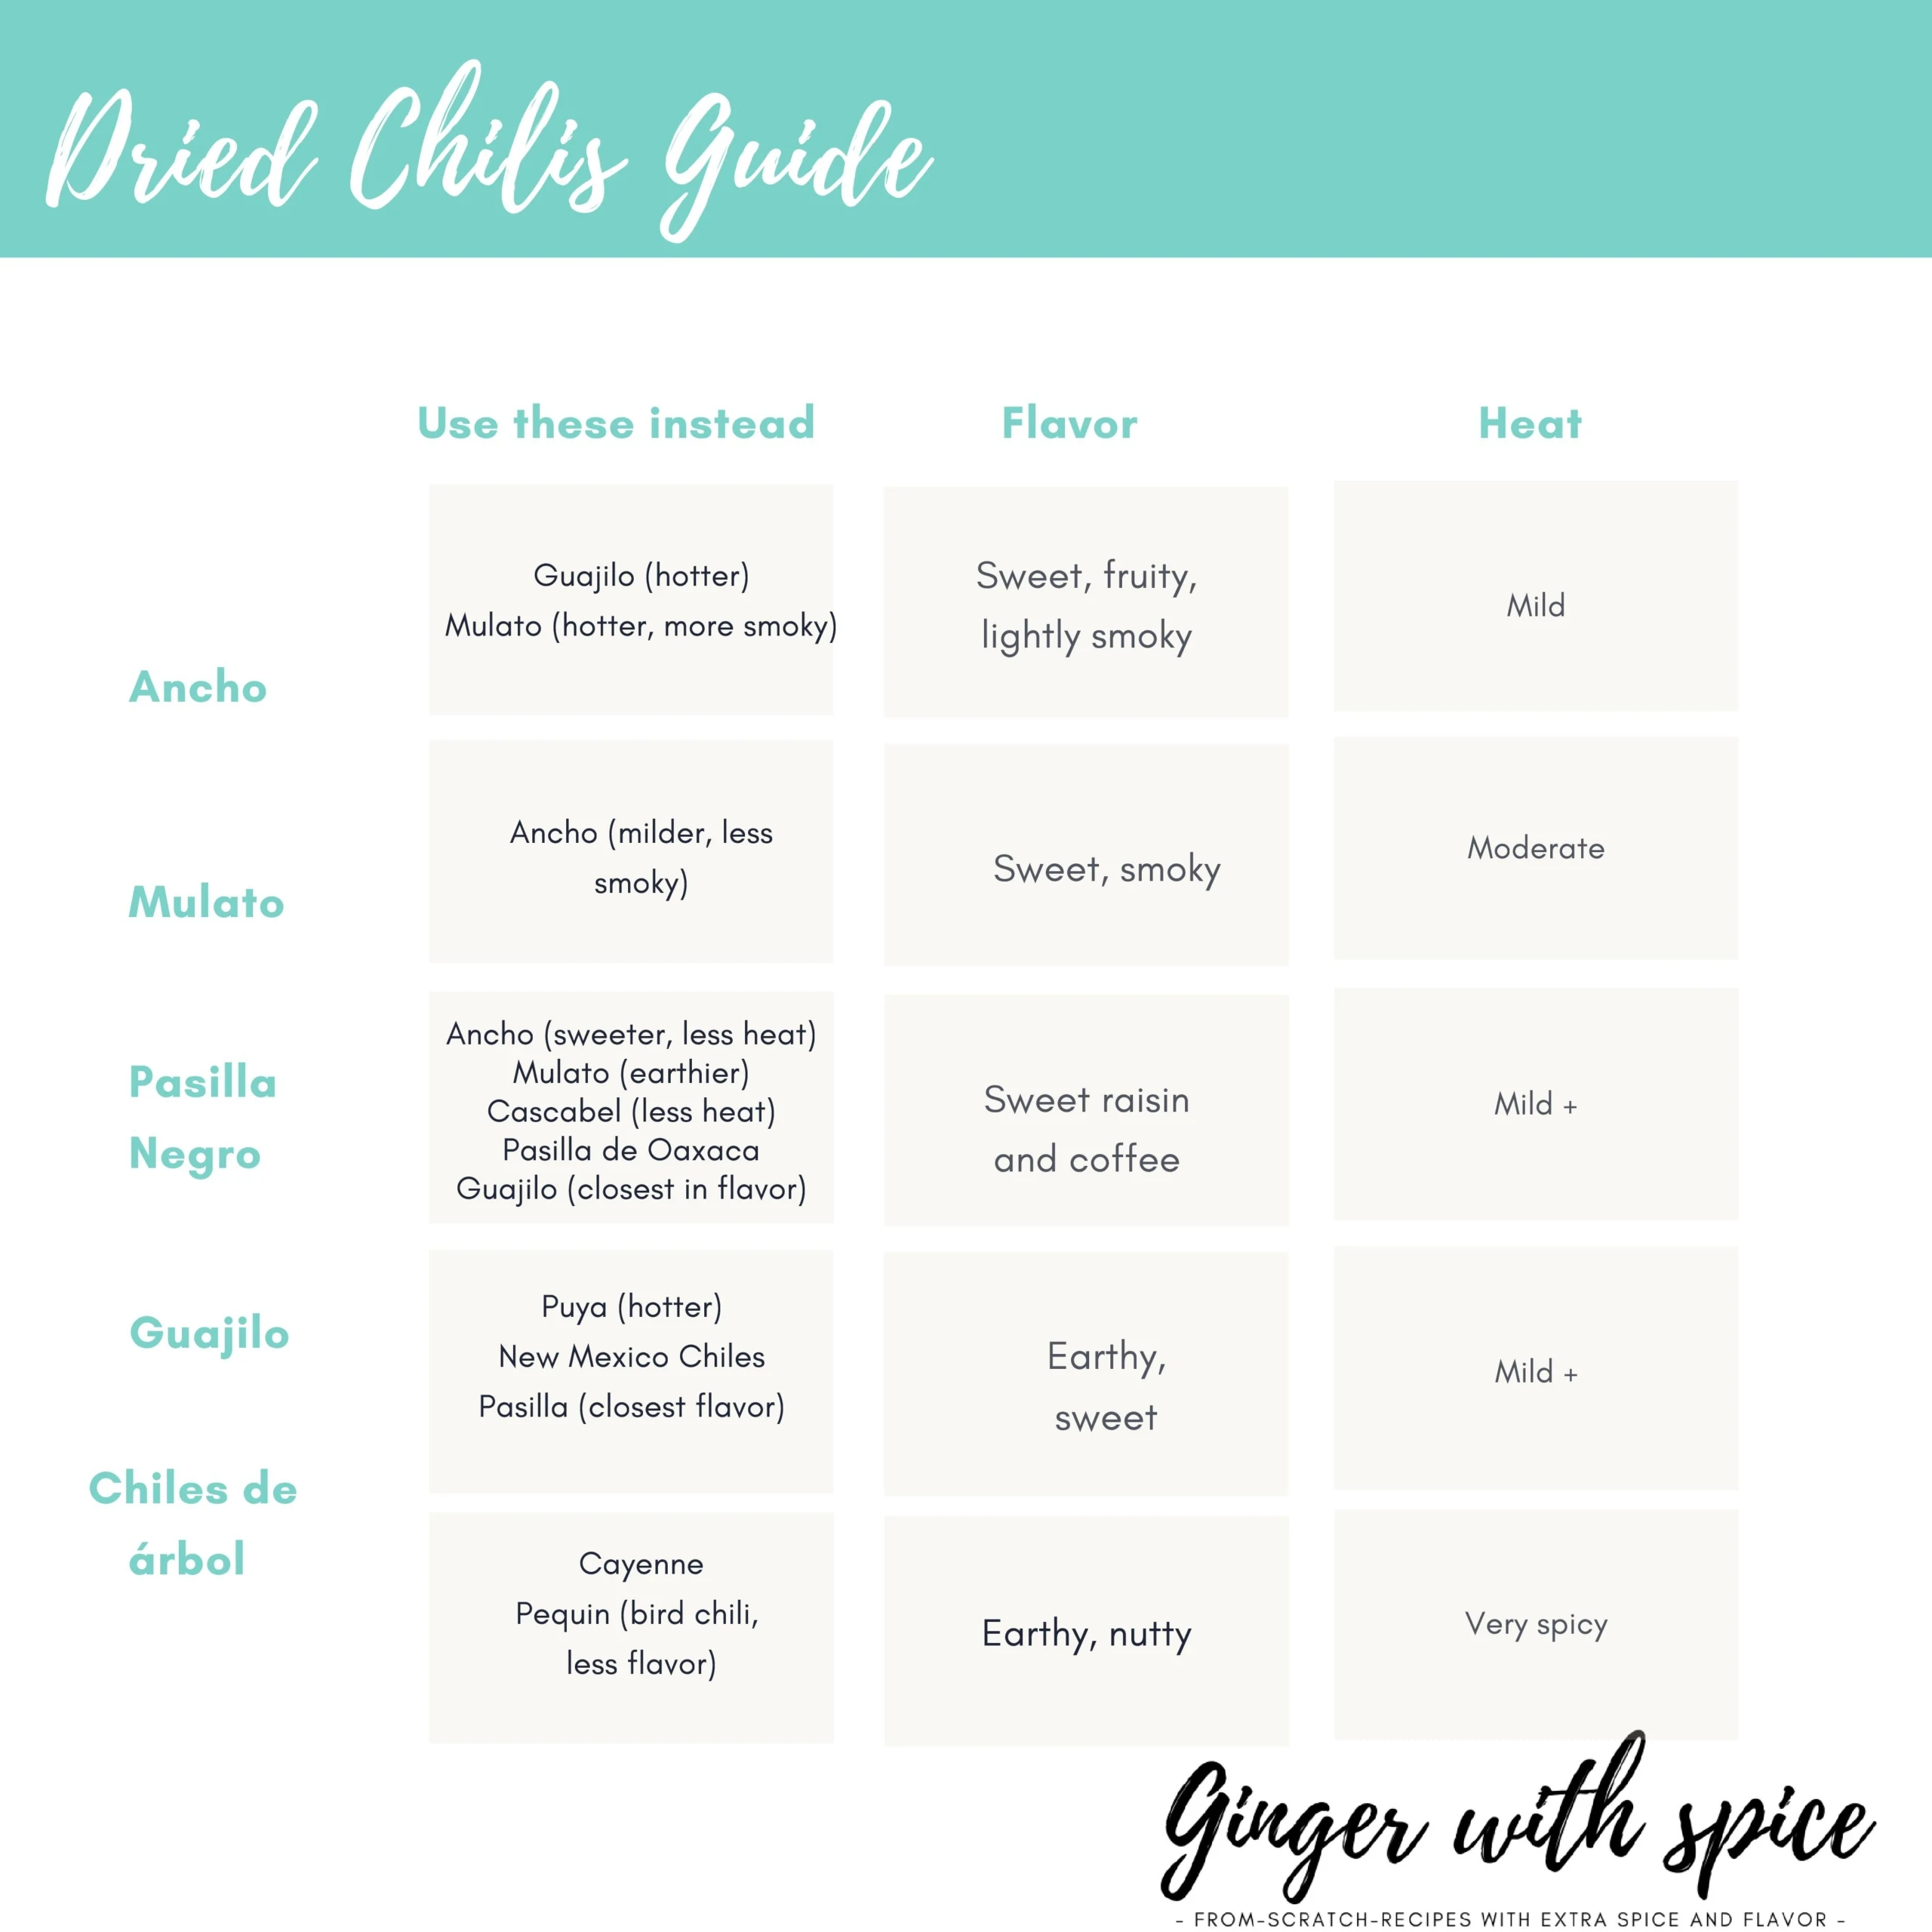 Dried chilis guide infographic.